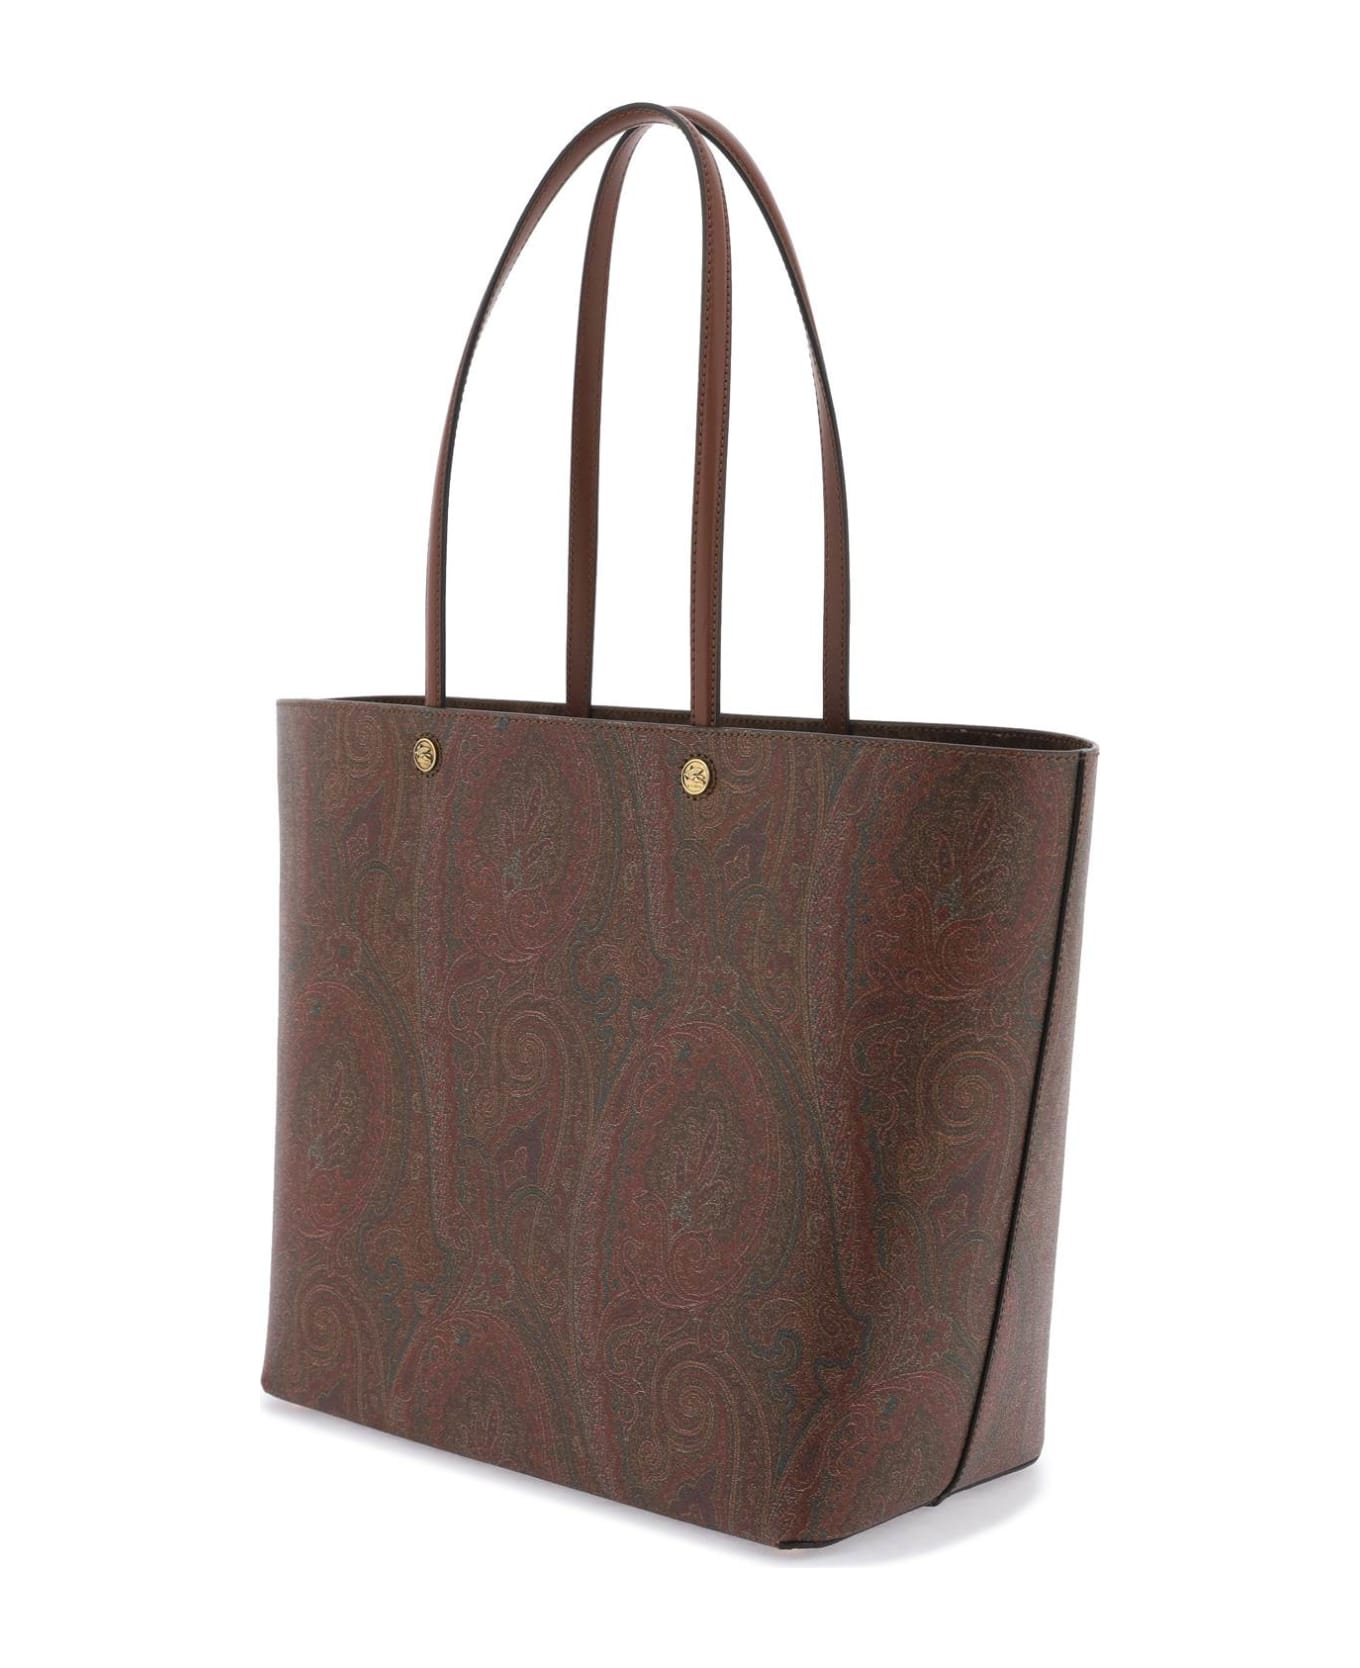 Etro Brown Leather Blend Bag - MARRONE SCURO 2 (Brown) トートバッグ